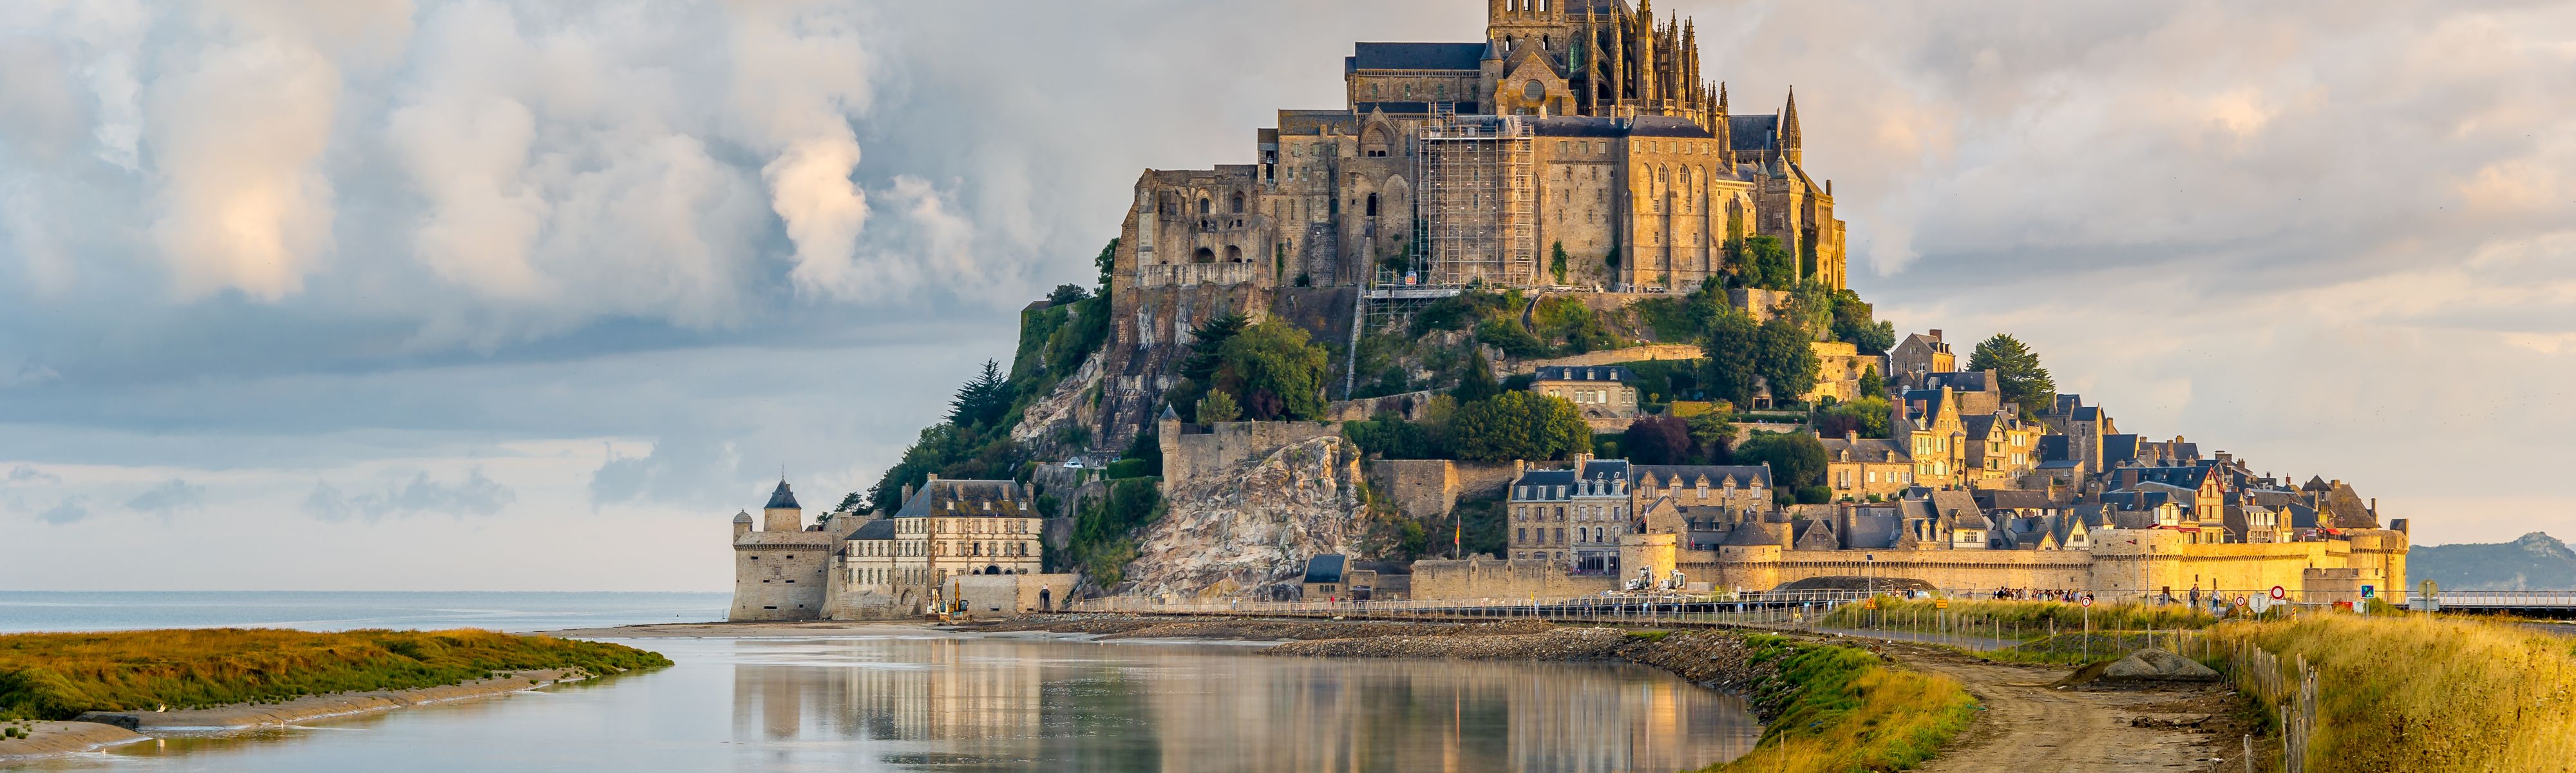 mont saint michael along the coast in france at sunset